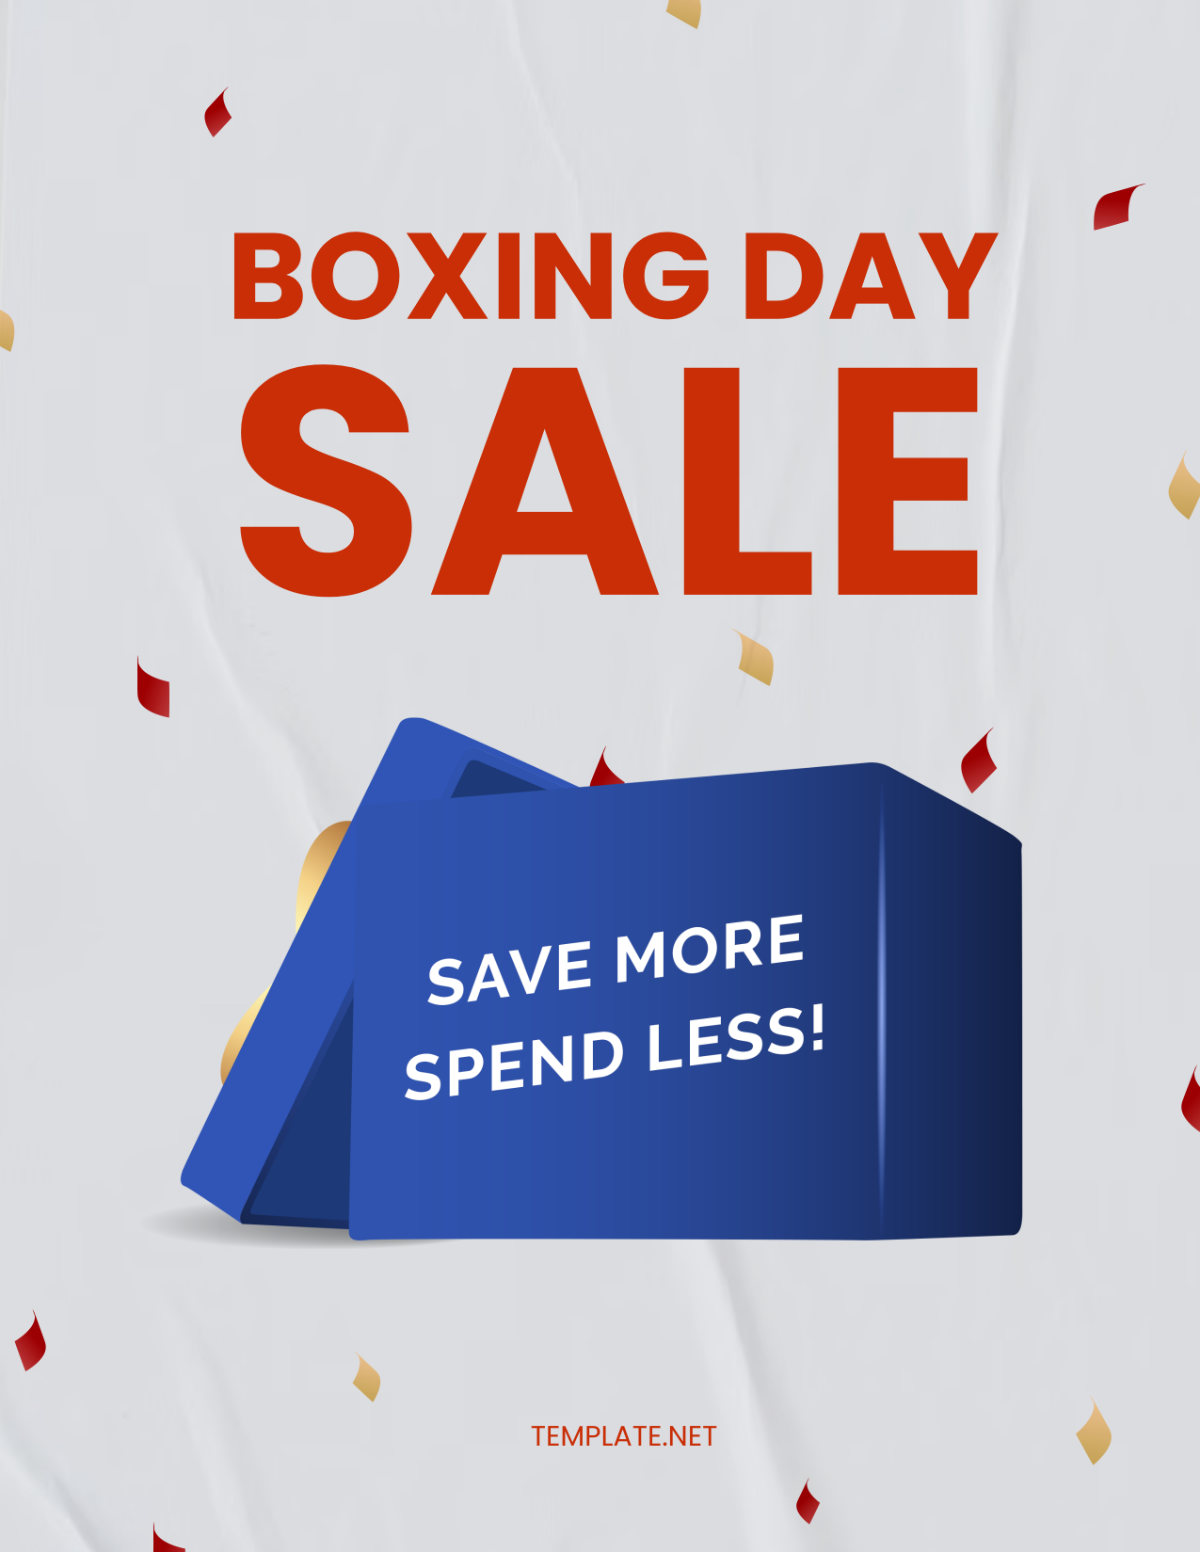 Upcoming Boxing Day Sale Template